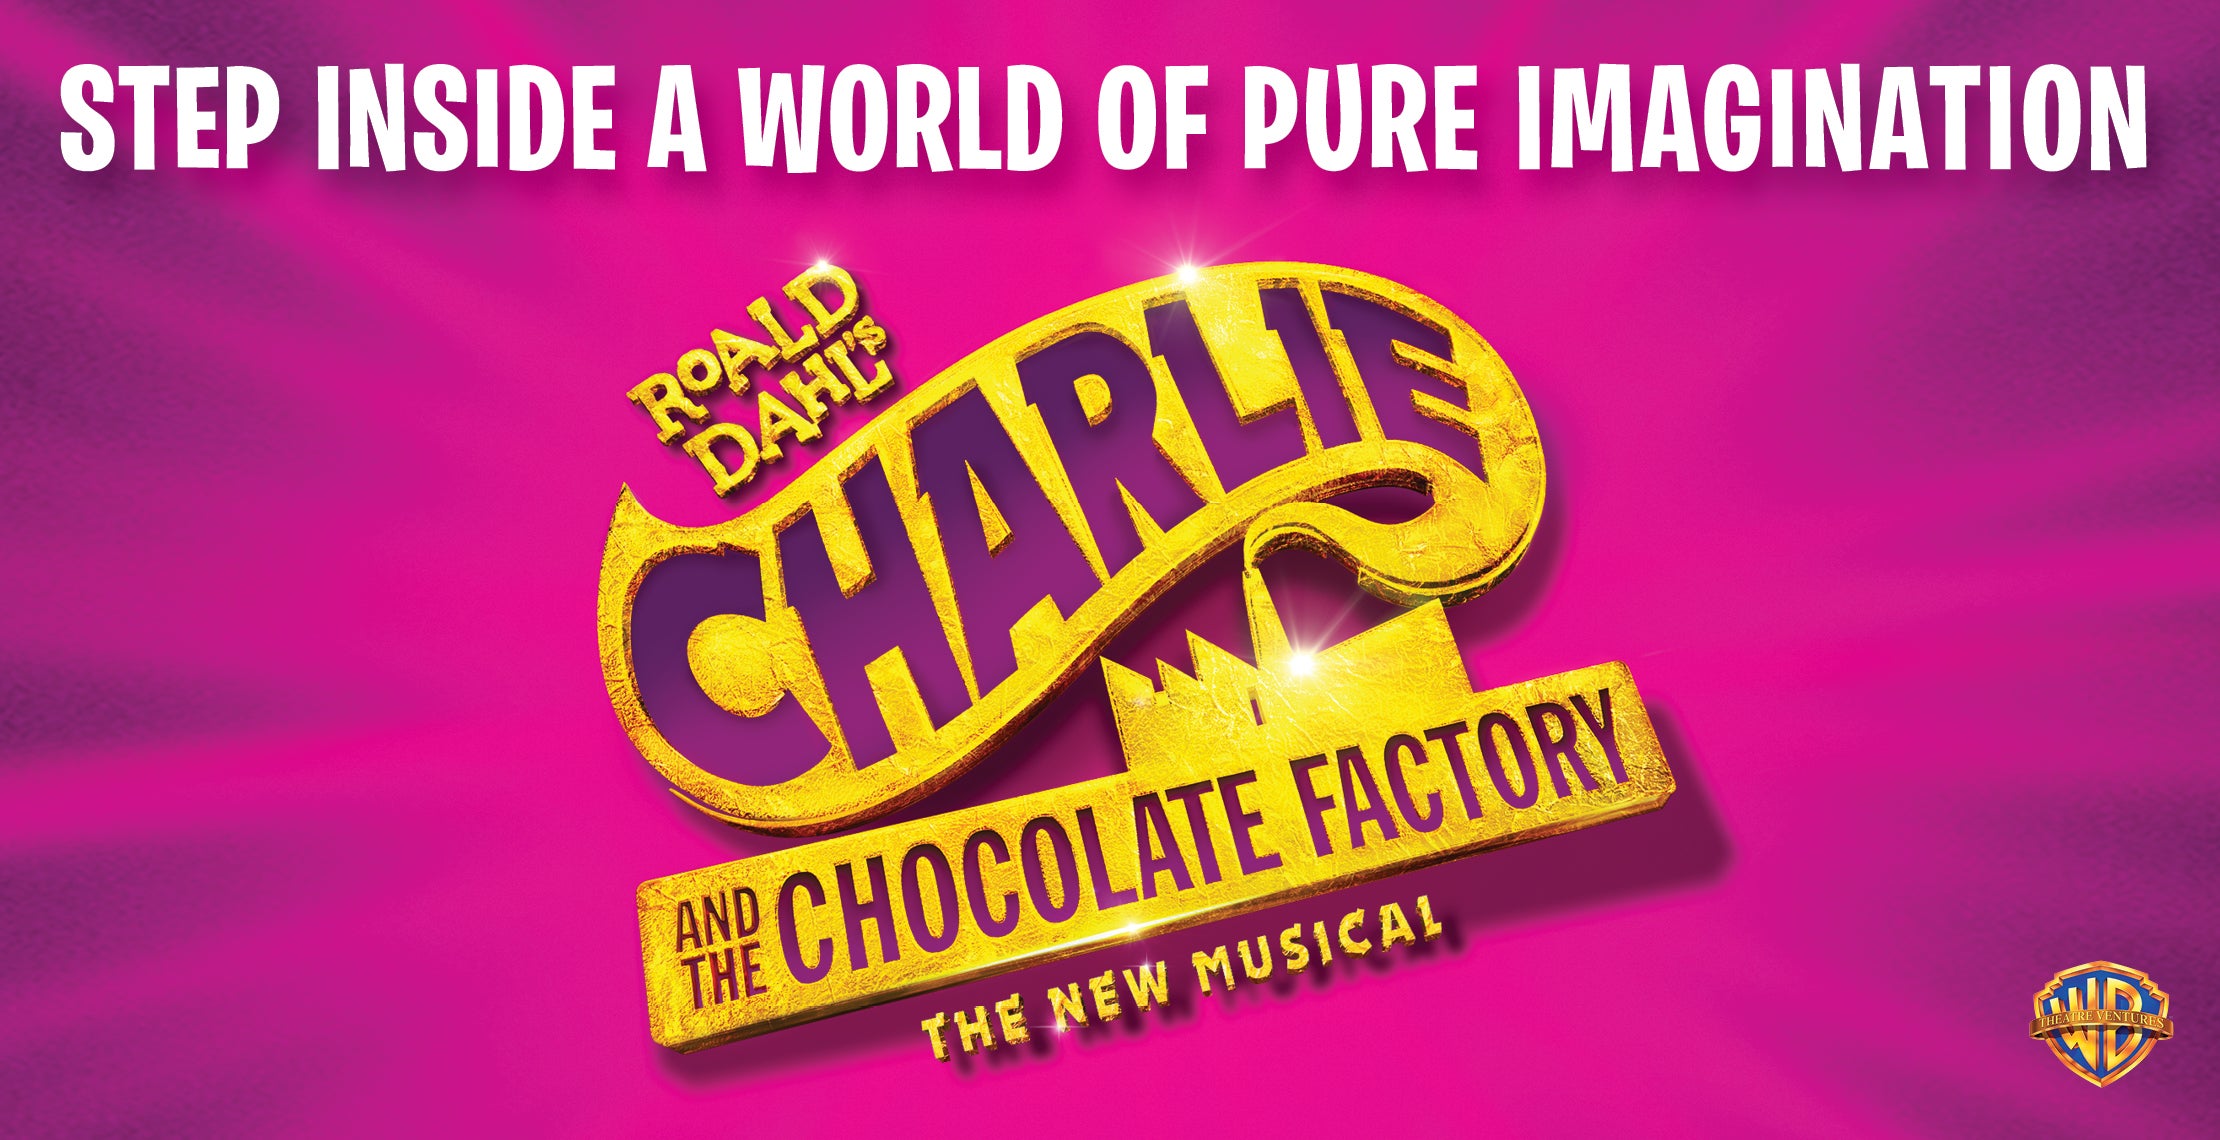 Roald Dahl’s Charlie and the Chocolate Factory